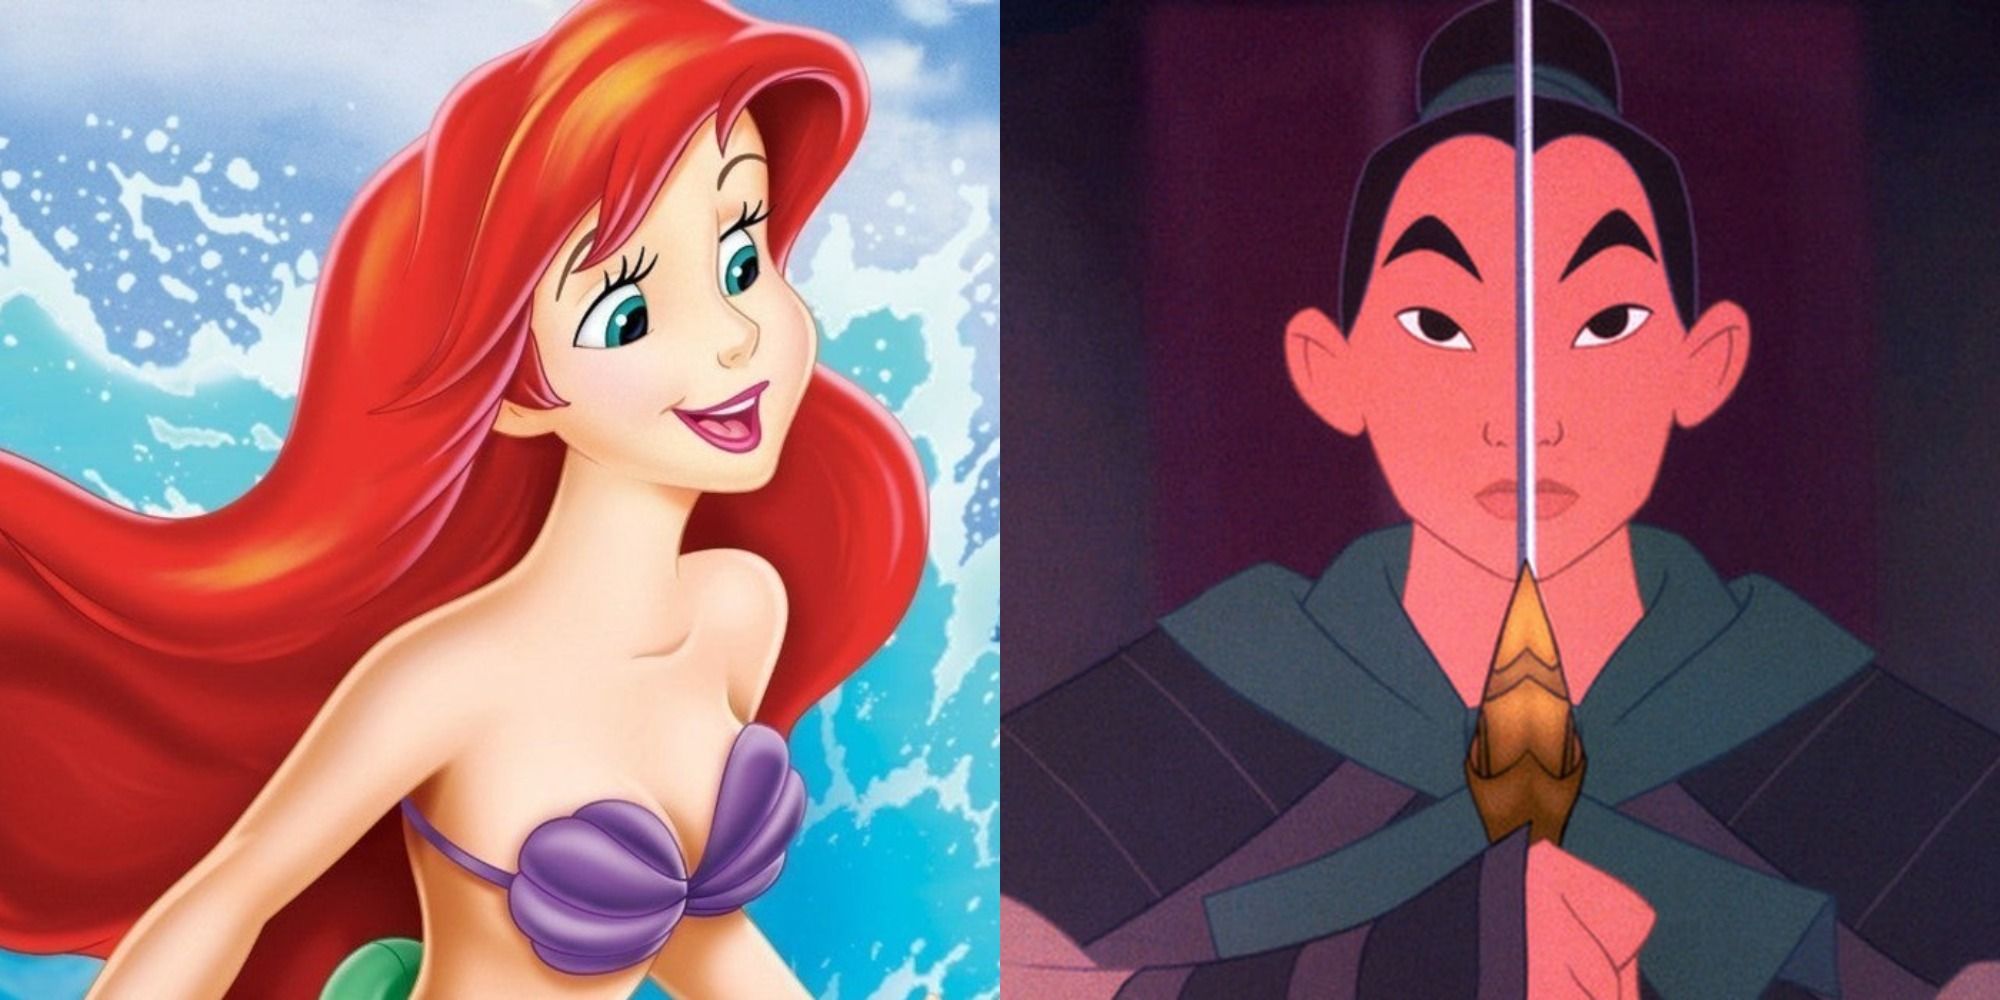 Ariel in The Little Mermaid and Mulan in Mulan